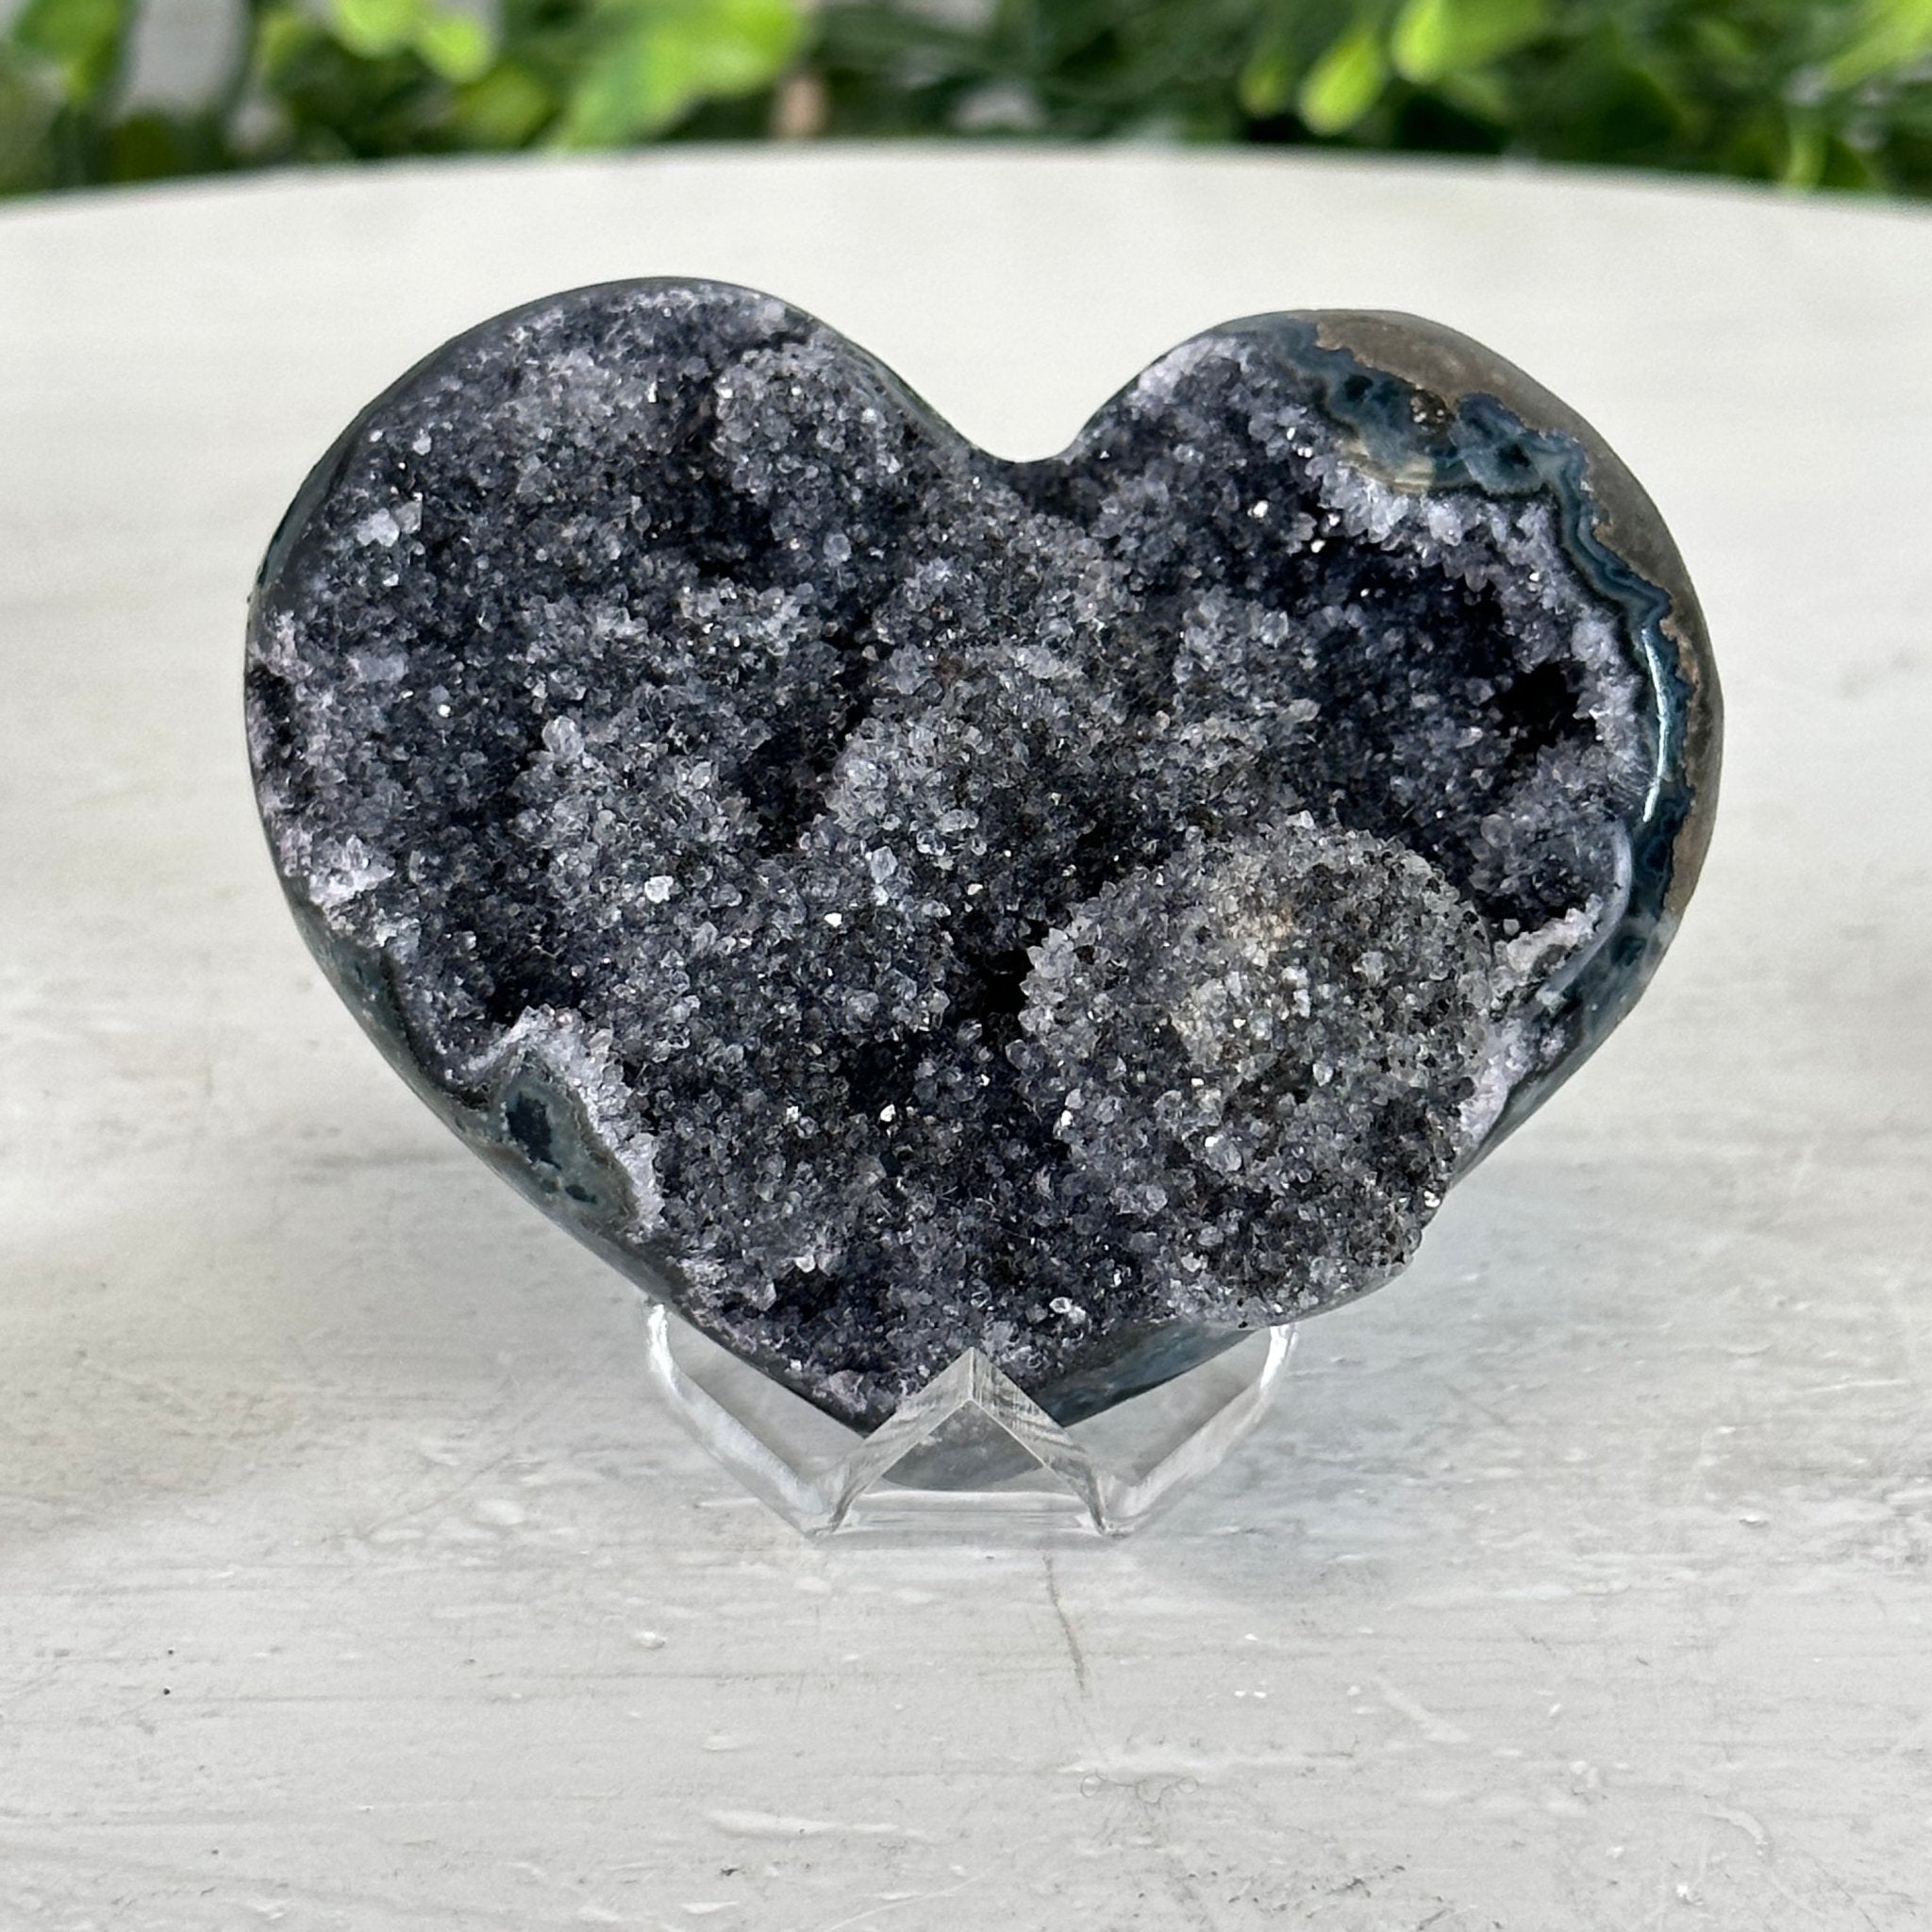 Extra Plus Quality Amethyst Heart Geode on an Acrylic Stand, 0.29 lbs & 2.1" Tall #5462-0024 by Brazil Gems - Brazil GemsBrazil GemsExtra Plus Quality Amethyst Heart Geode on an Acrylic Stand, 0.29 lbs & 2.1" Tall #5462-0024 by Brazil GemsHearts5462-0024